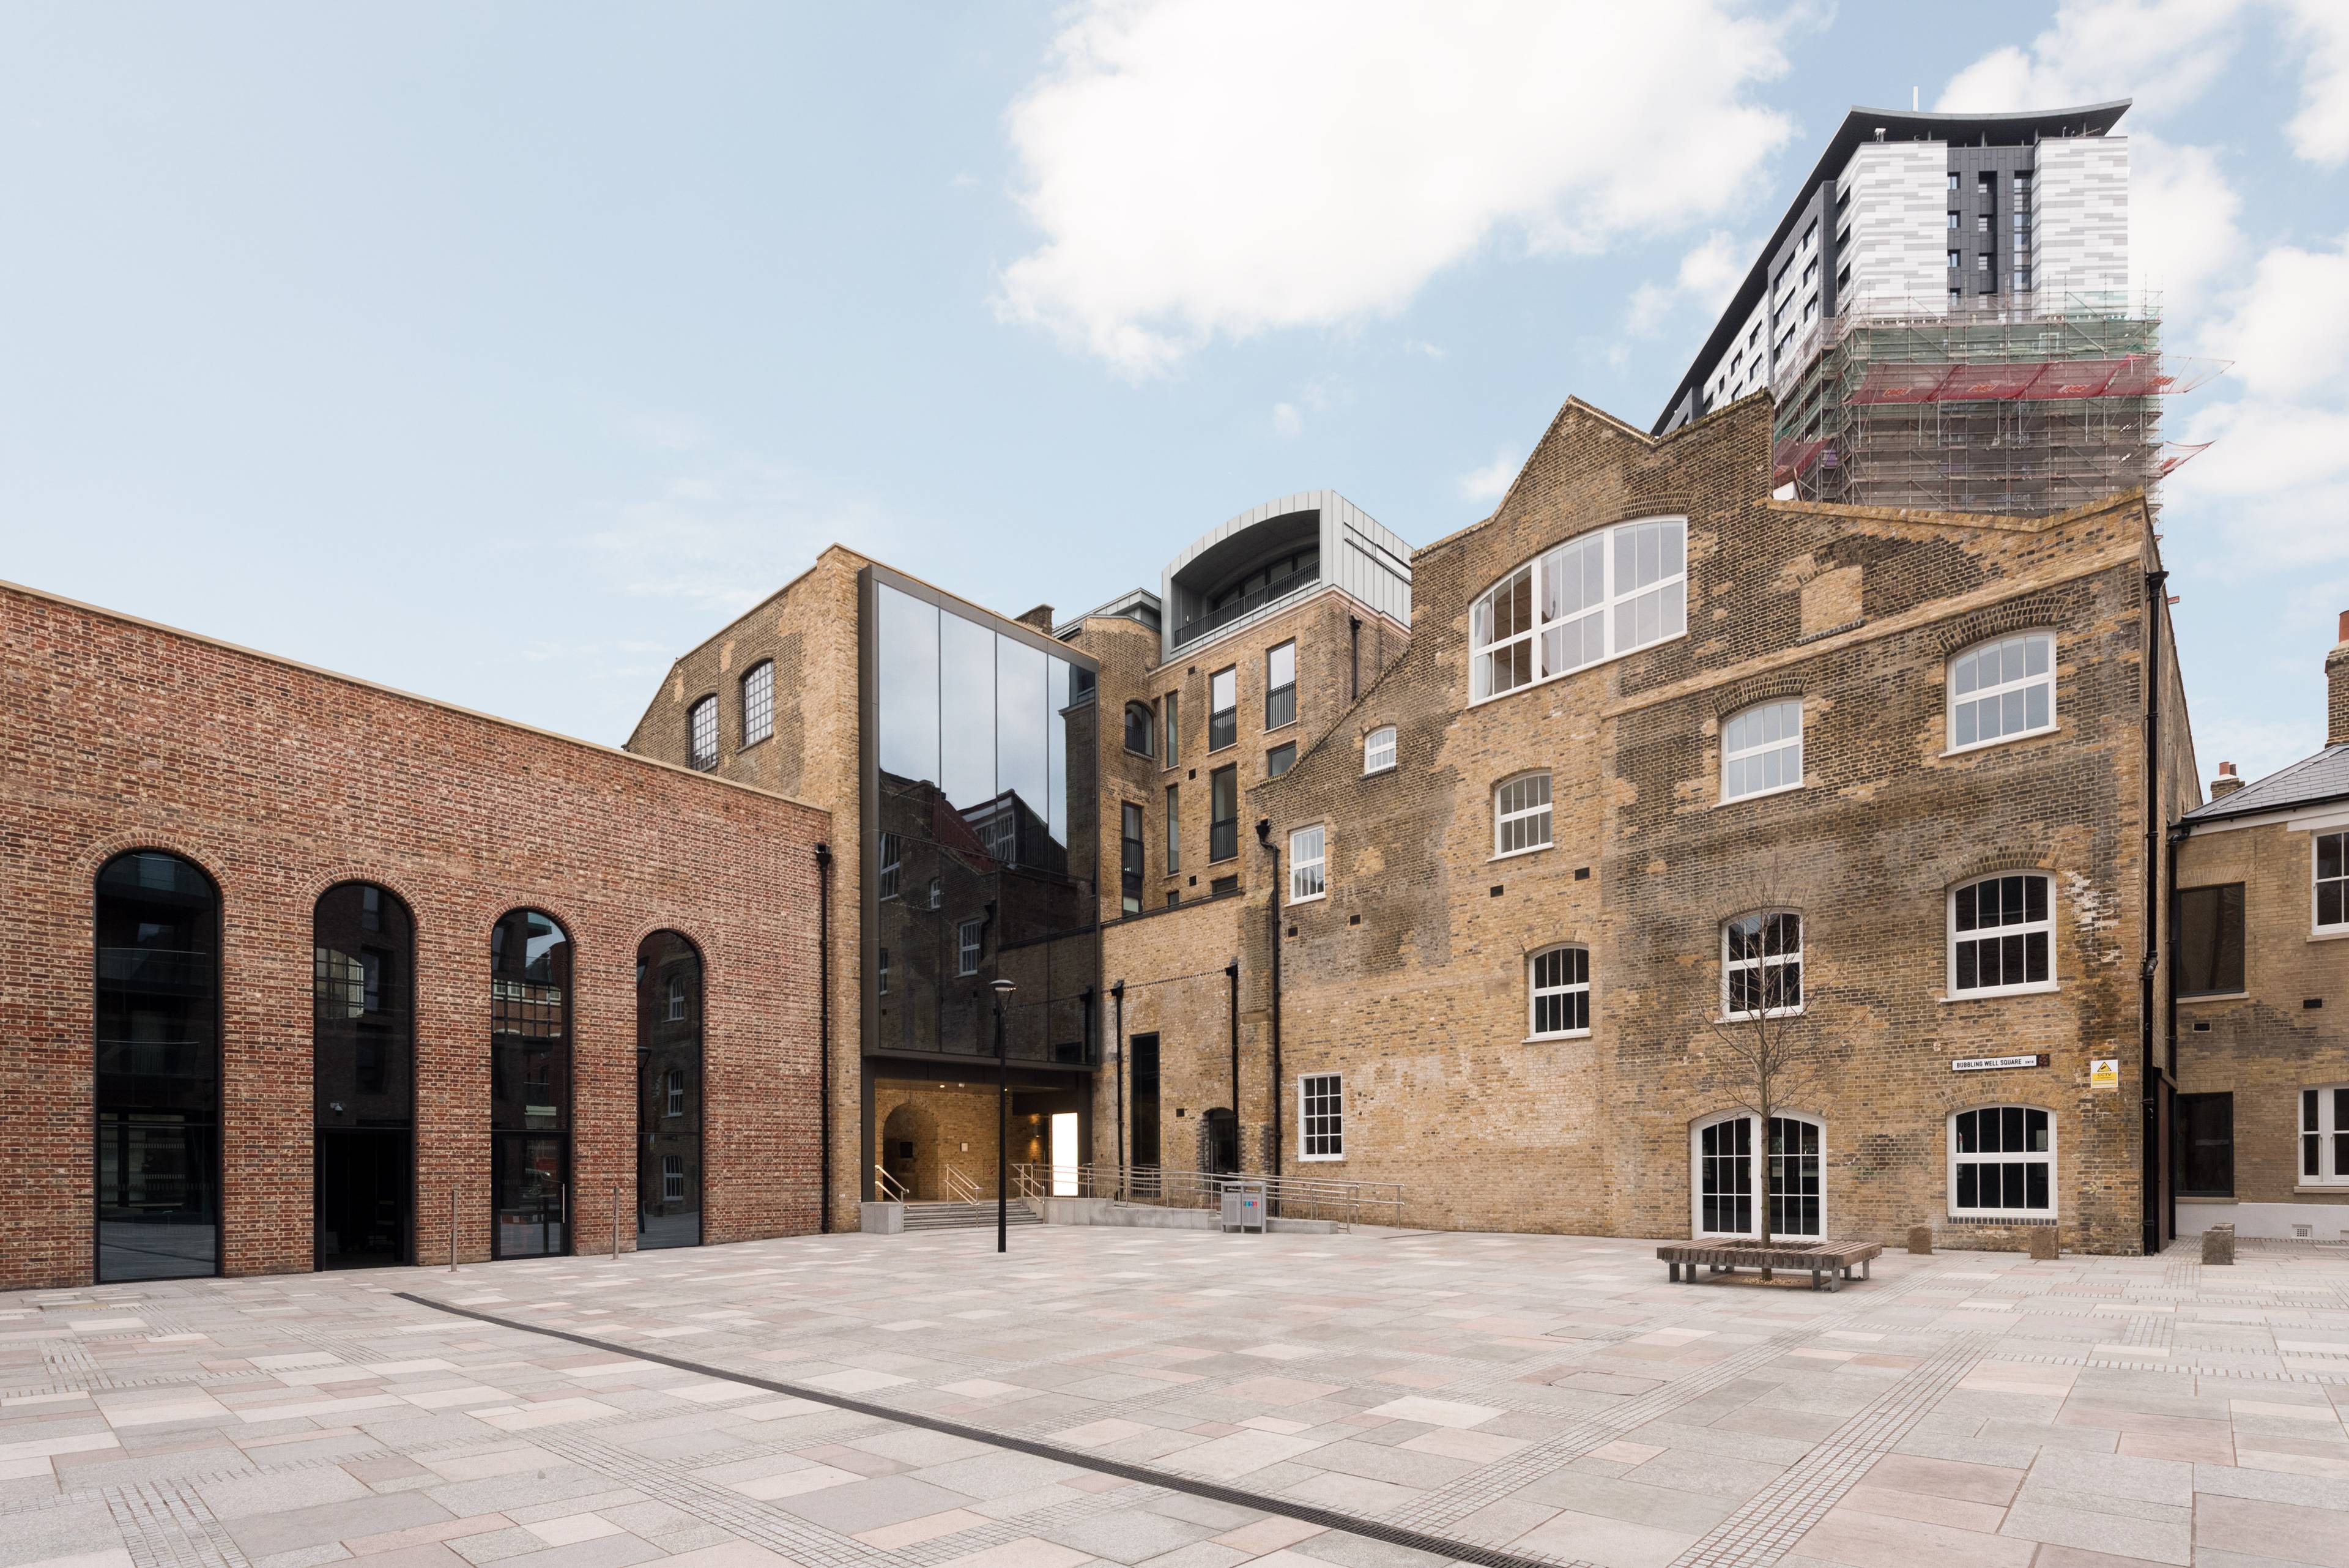 2 Bedroom Duplex New York Style Coopers' Lofts For Sale In London's Oldest Brewery, SW18